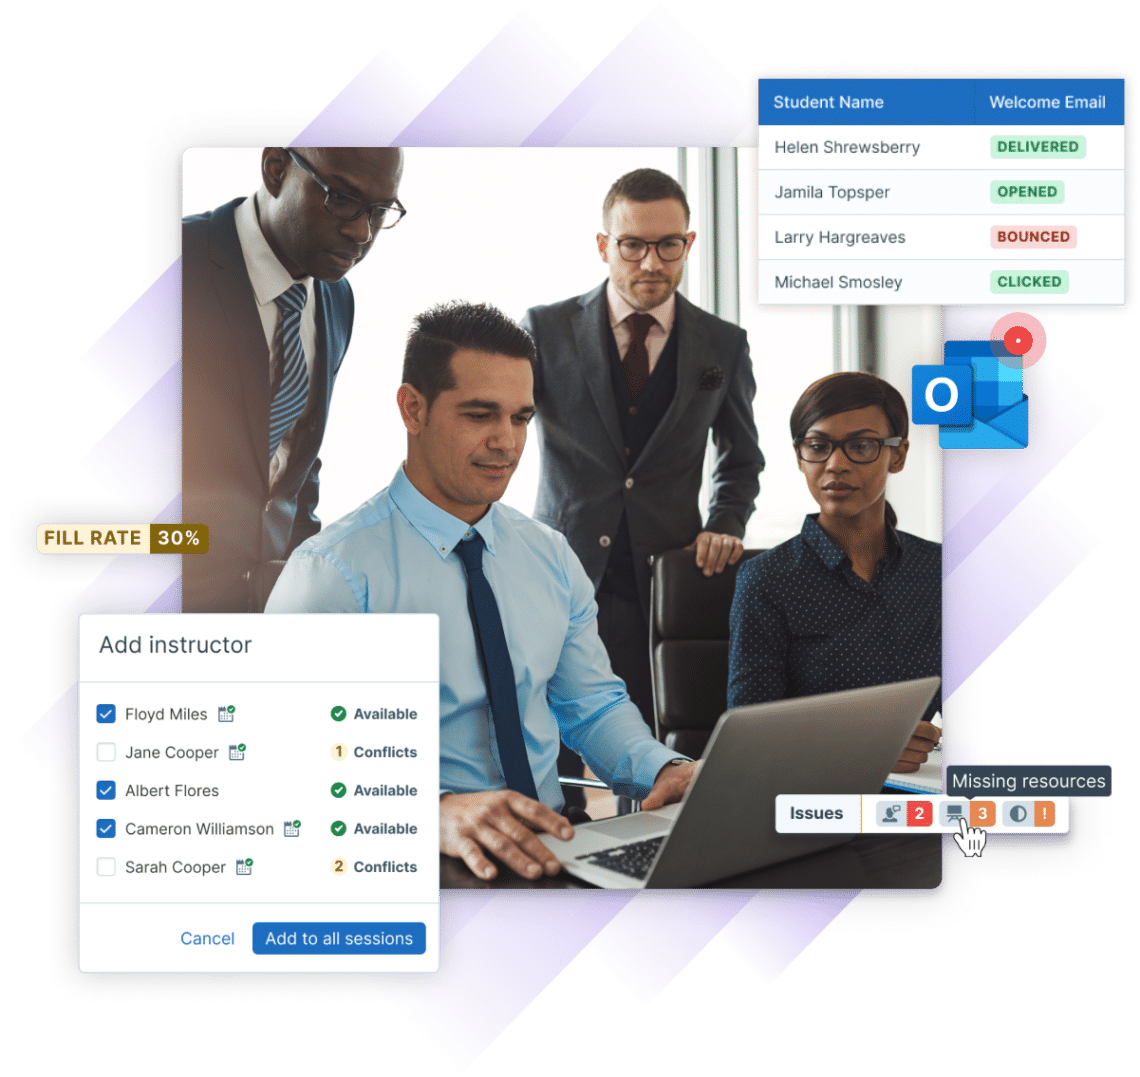 Training team in a board room looking at one colleague's screen, while UI elements from Administrate such as fill rate indicator, email statuses, and instructor modal float around the image.